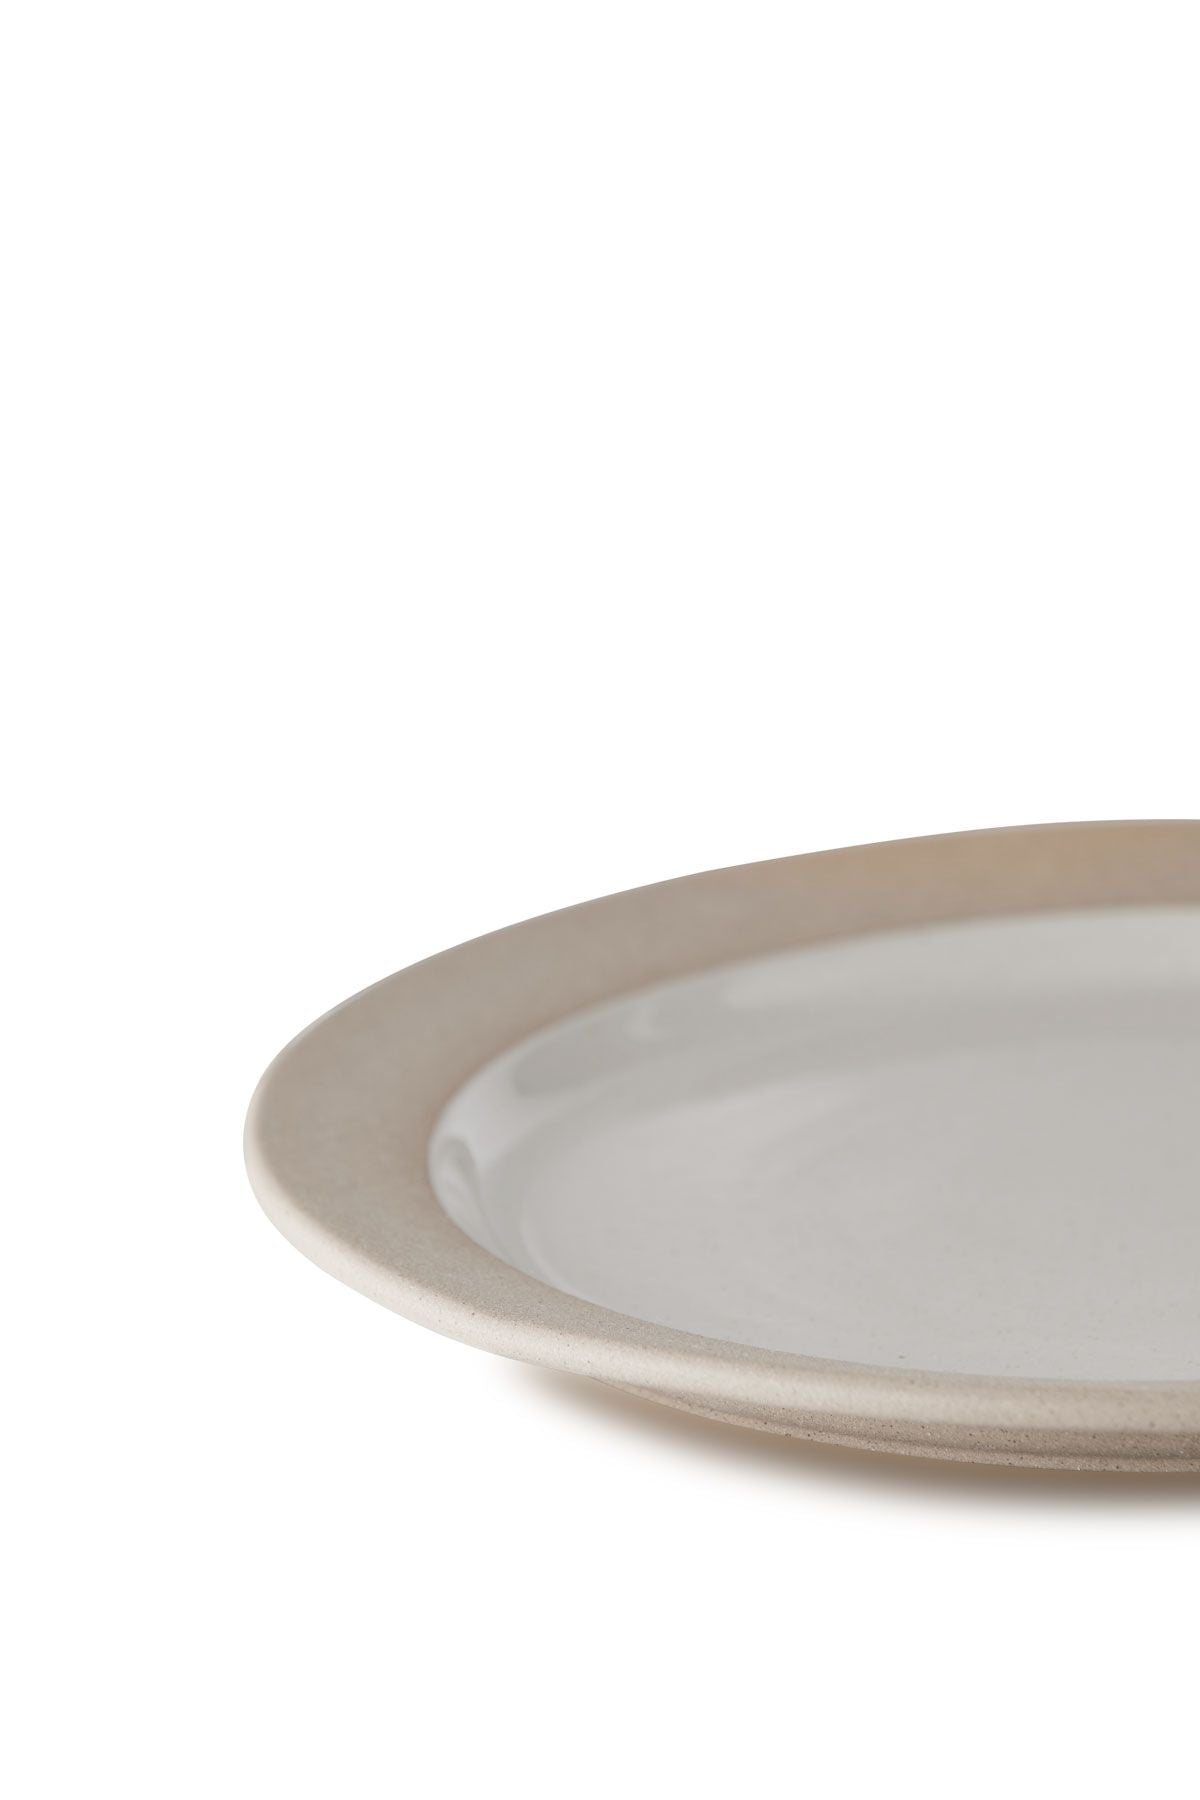 Studio About Clayware Set Of 2 Plates Large, Sand/Grey